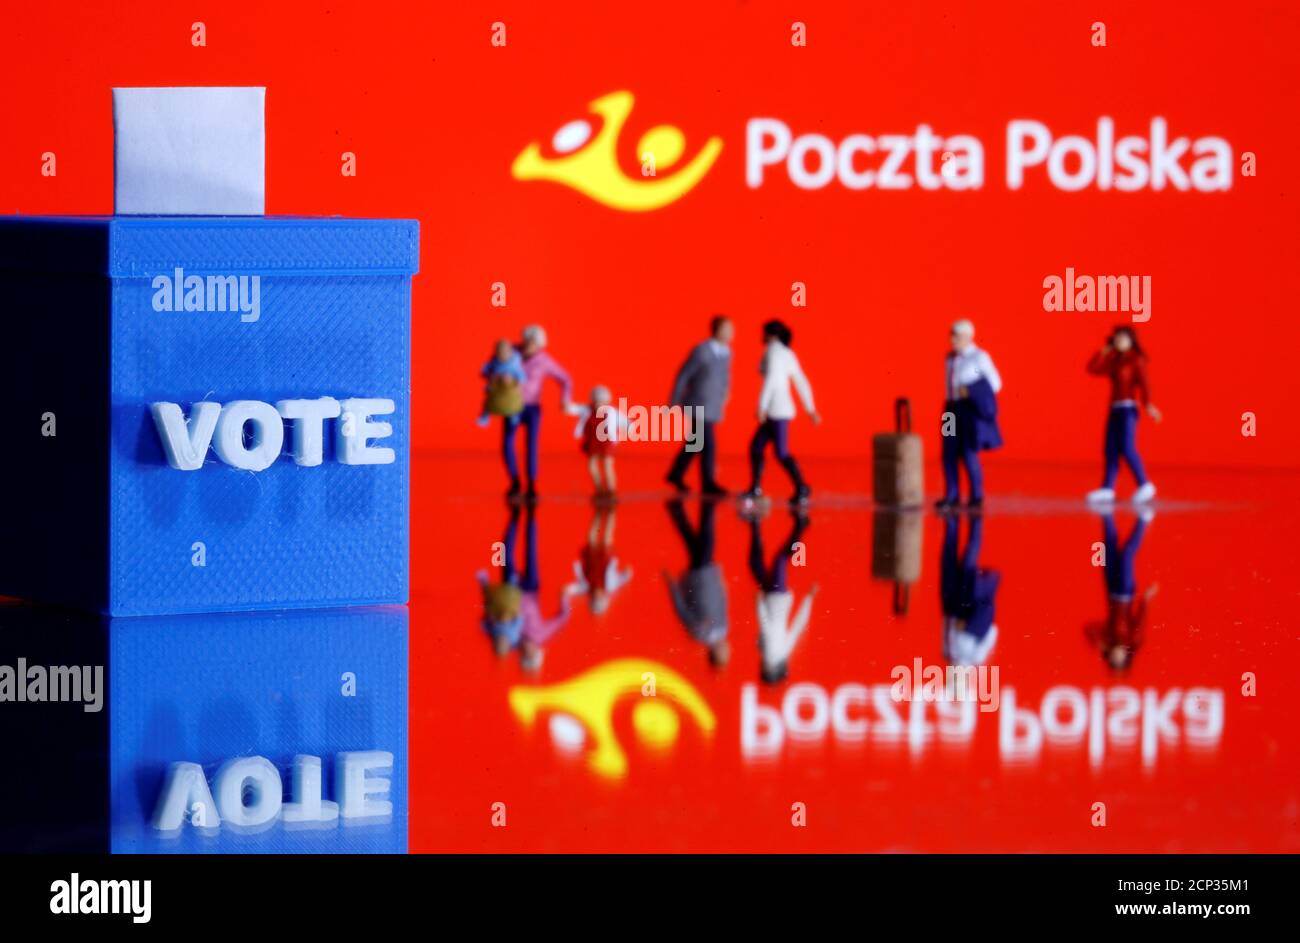 A 3D printed ballot box and toy people figures are seen in front of displayed Poczta Polska logo in this illustration taken May 4, 2020. REUTERS/Dado Ruvic/Illustration Stock Photo